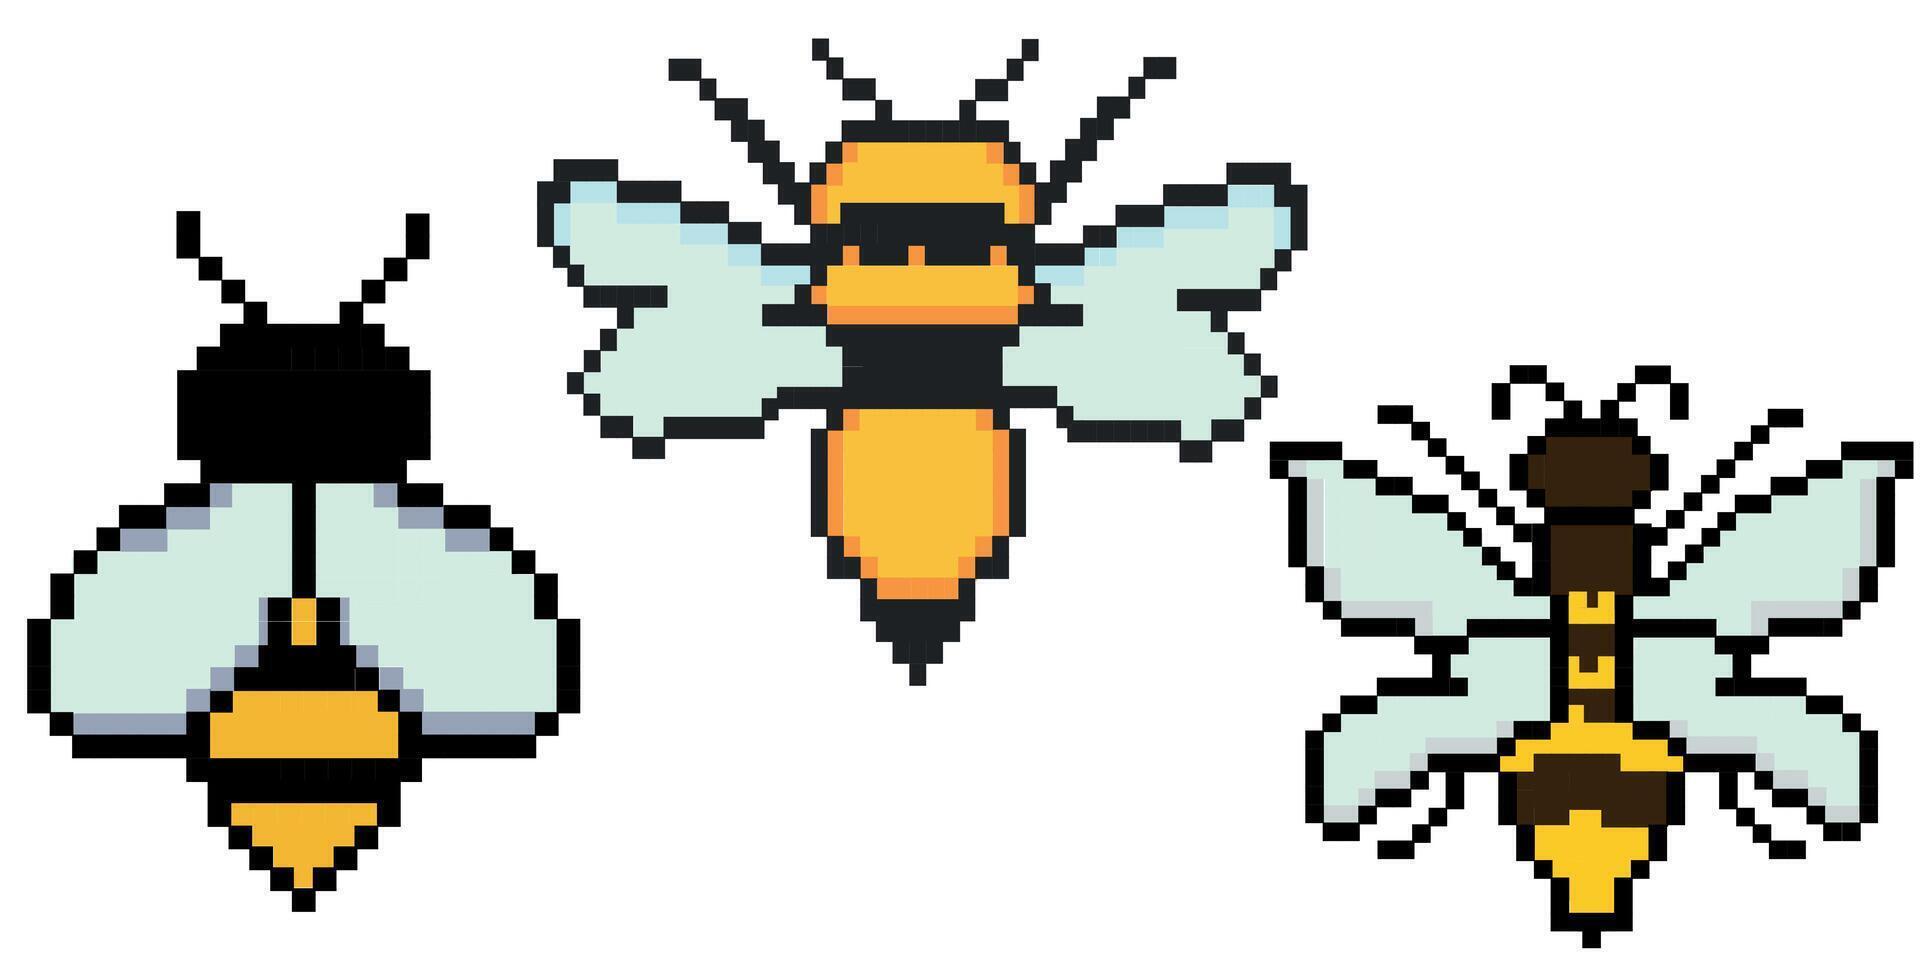 Bee pixel art. Vintage 8 bit, 80s, 90s game style, computer arcade game items. Pixelated mosaic retro game style. vector